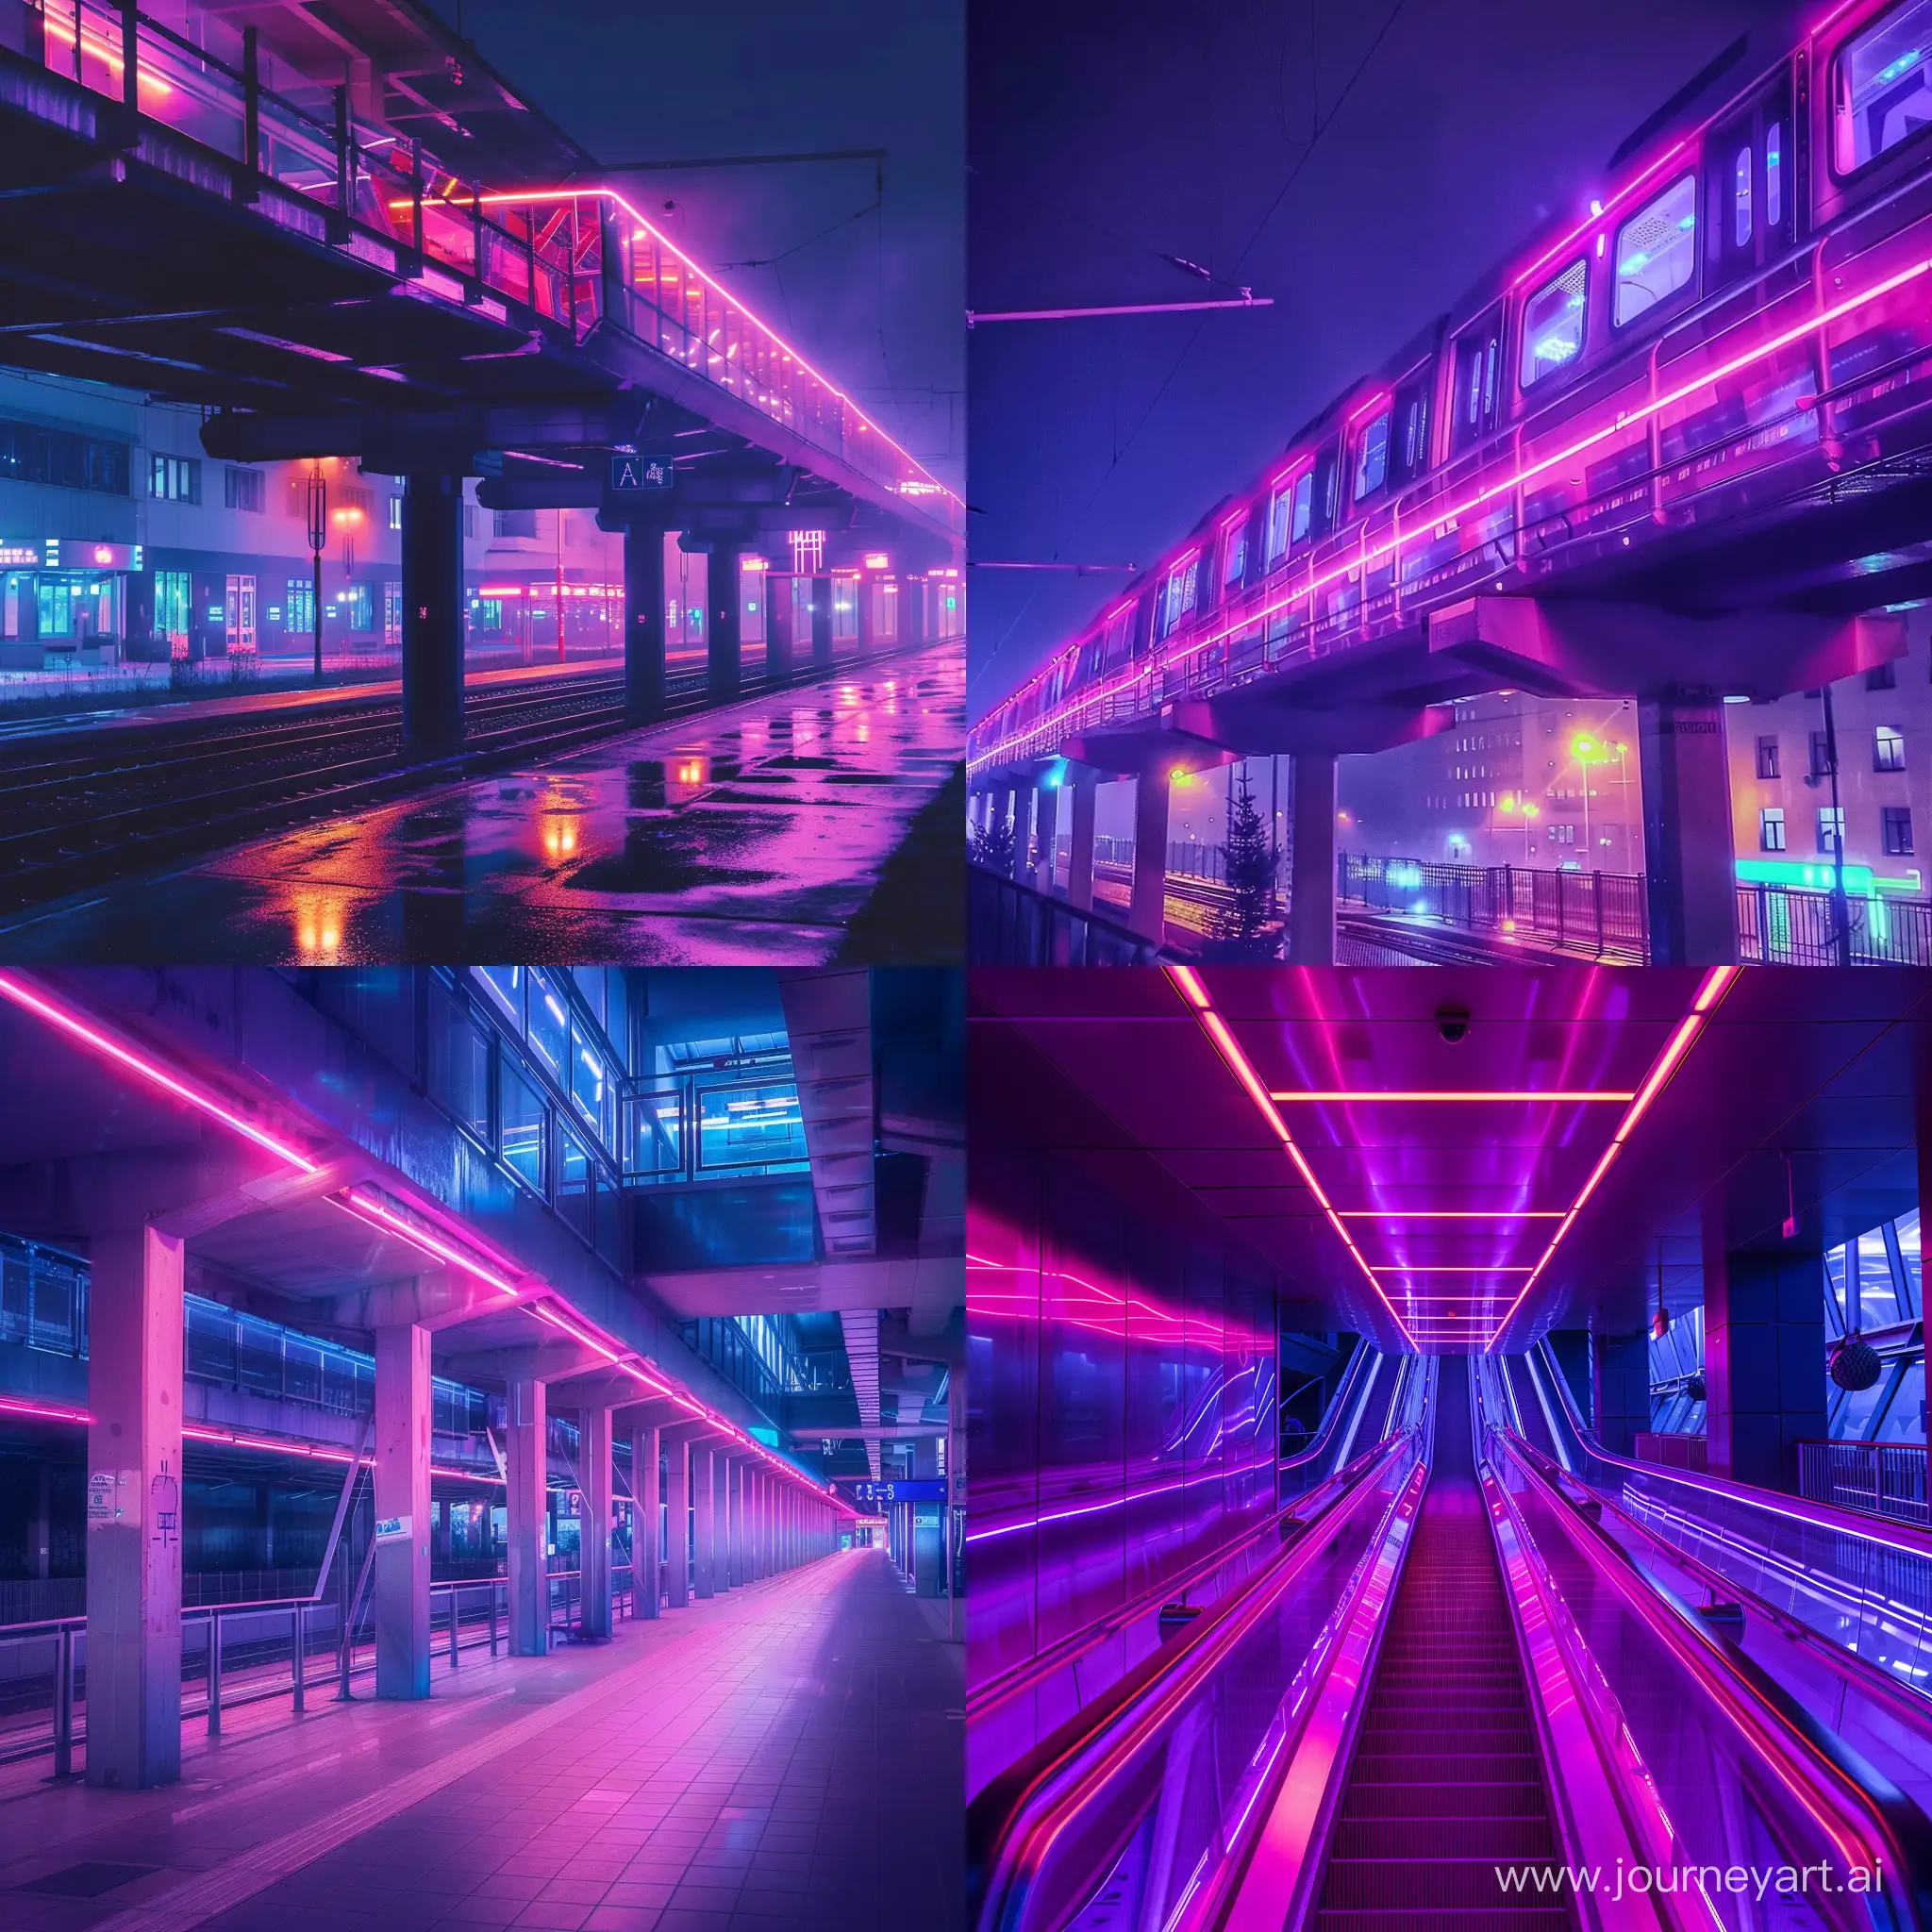 An elevated futuristic subway in Polish city named Bydgoszcz, at night, full of neons, most purples